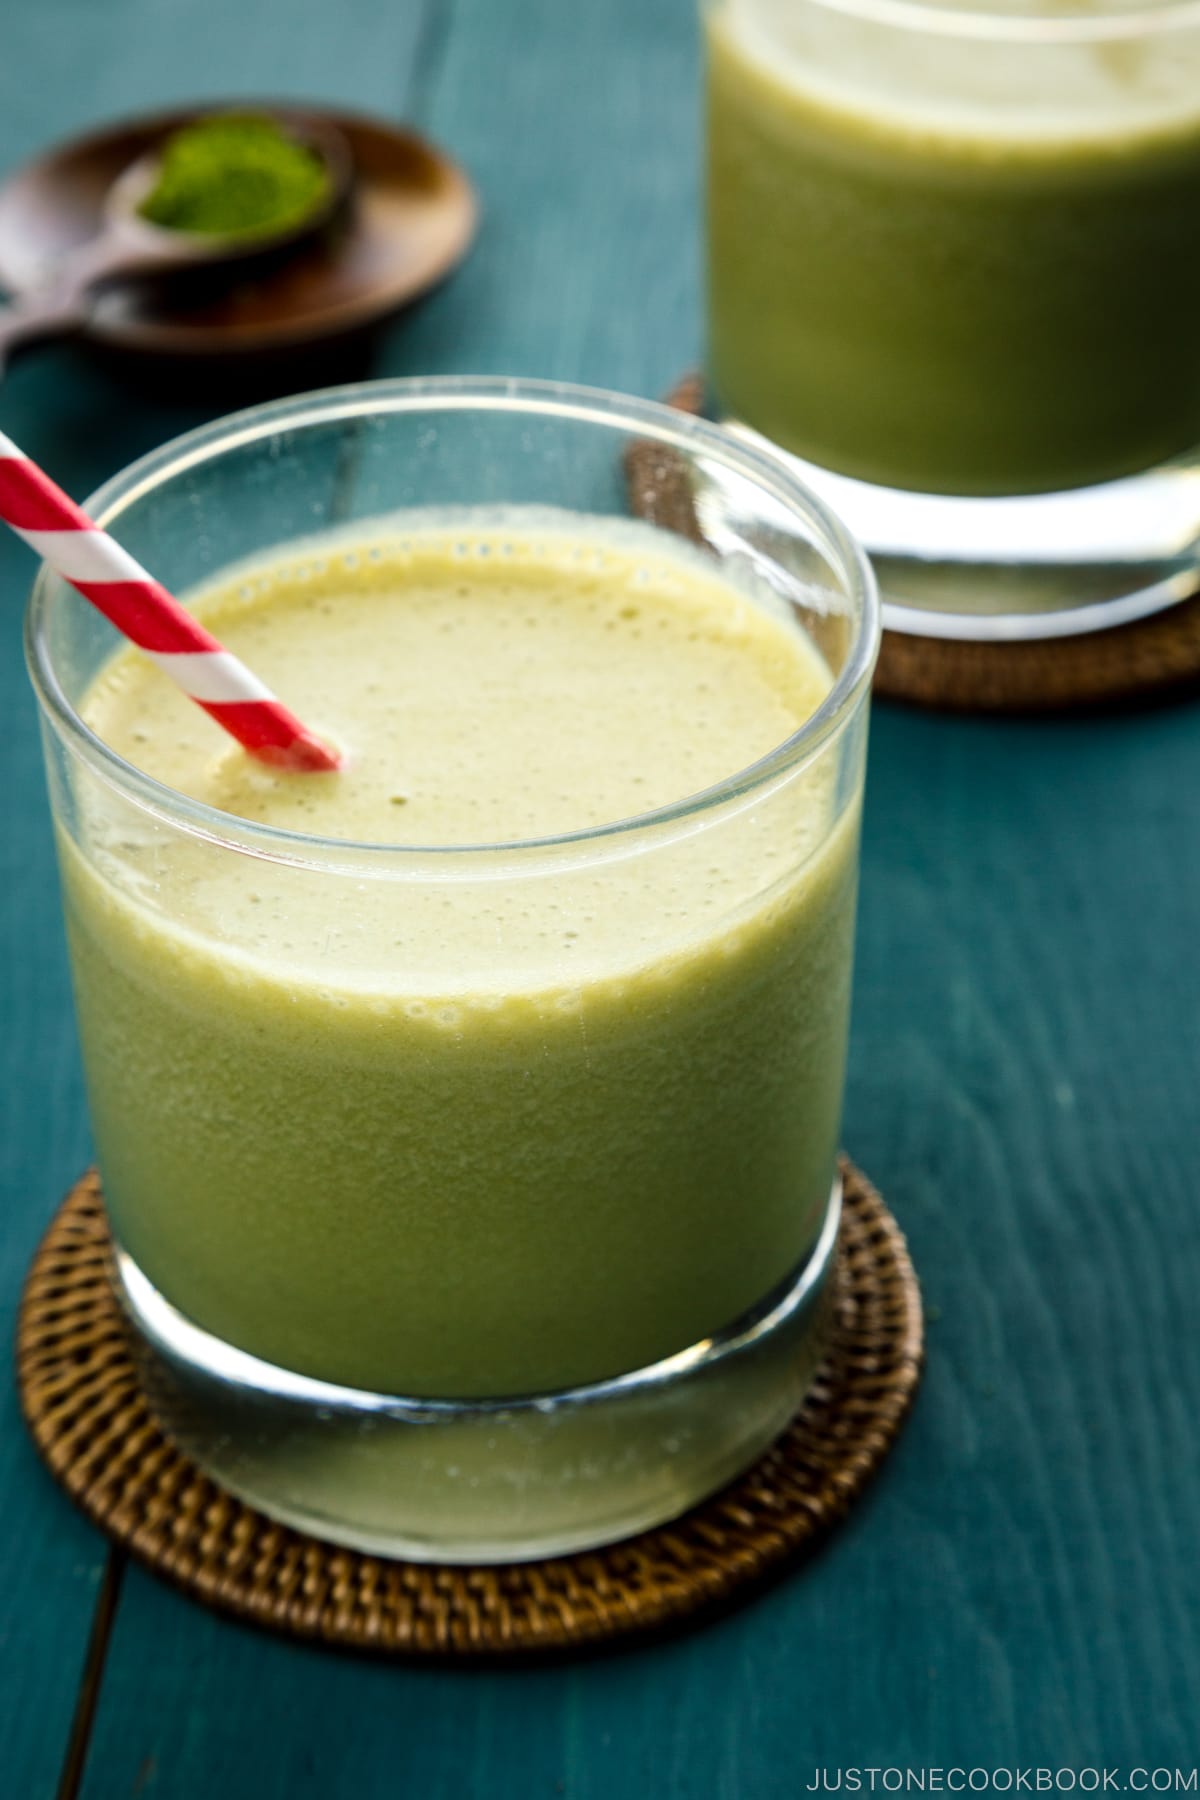 Glasses containing Green Tea Smoothie.